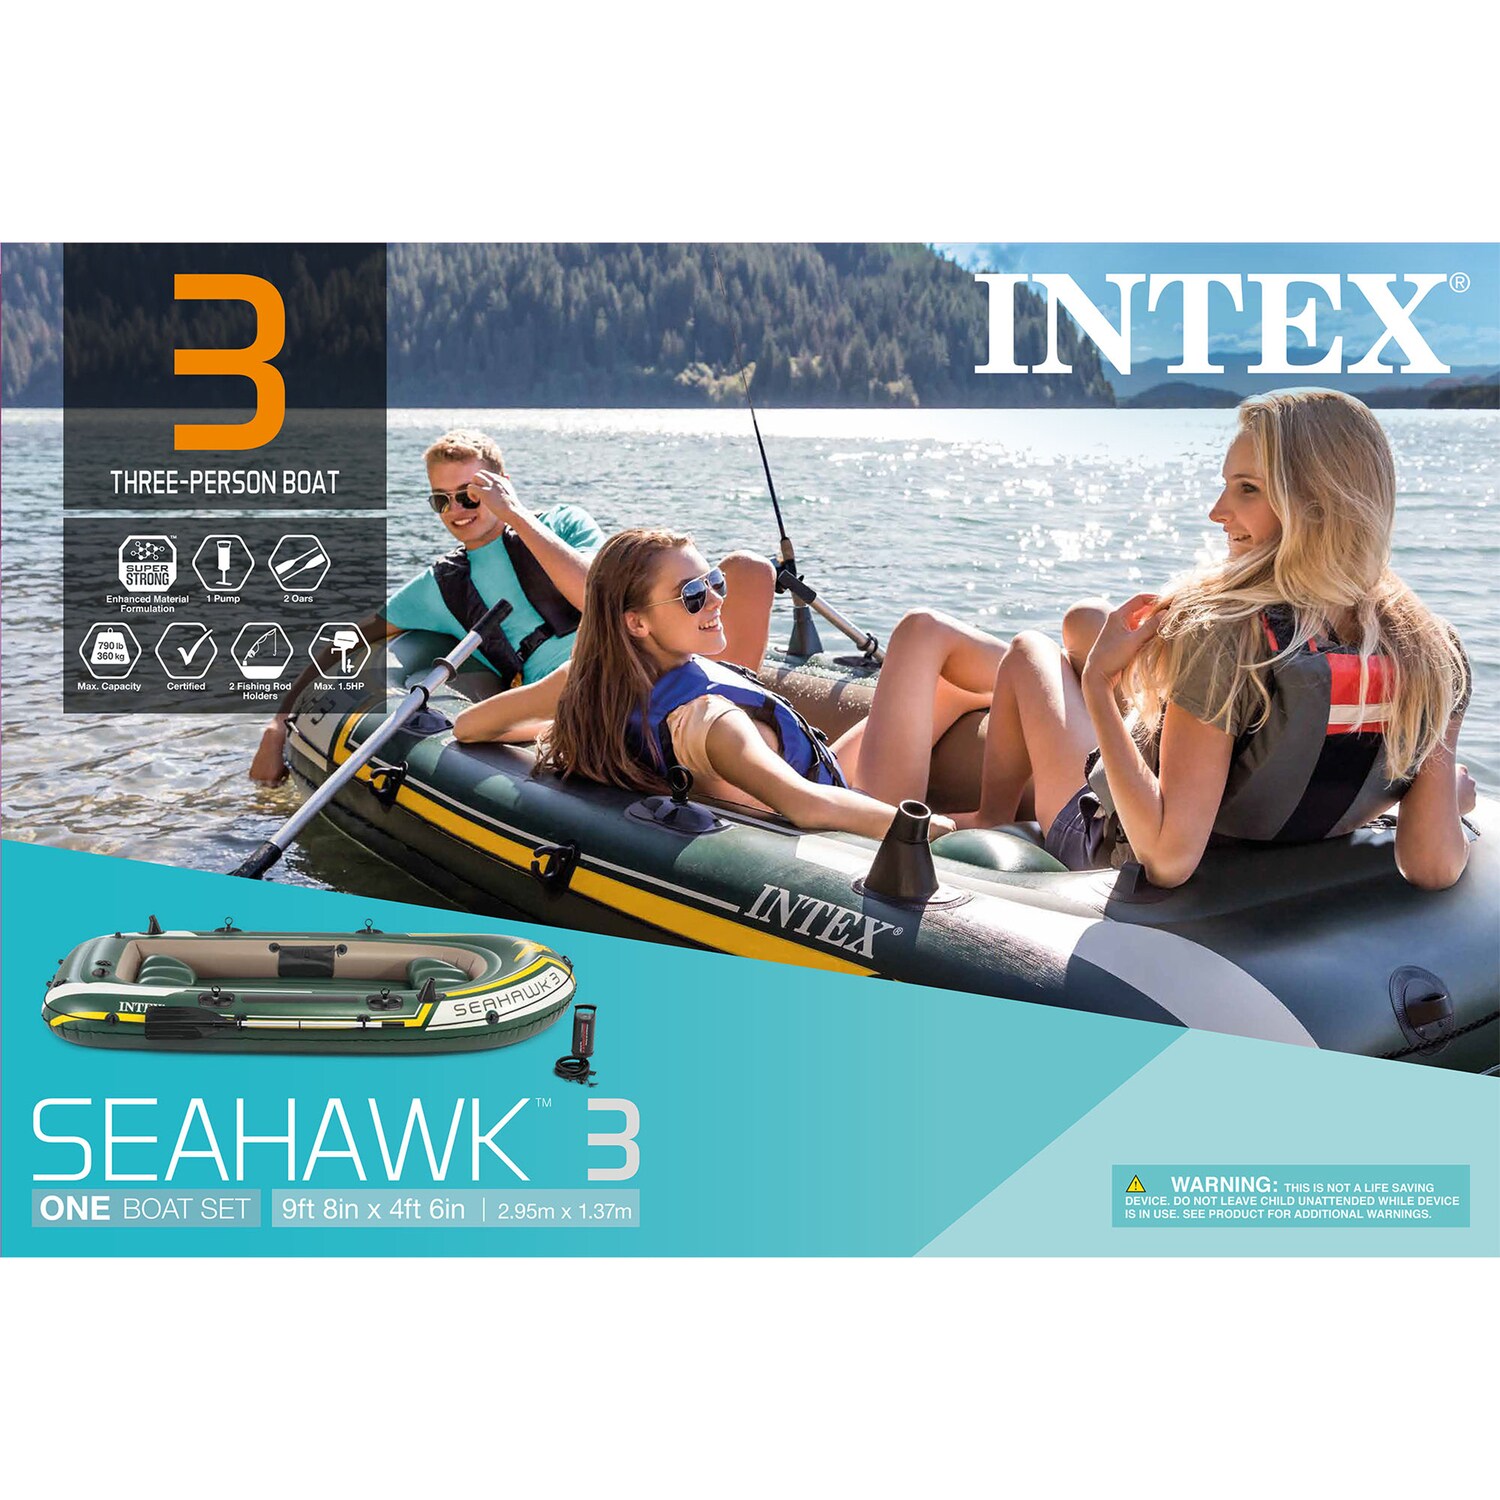 INTEX Seahawk 11 ft 7 in Inflatable Boat Set